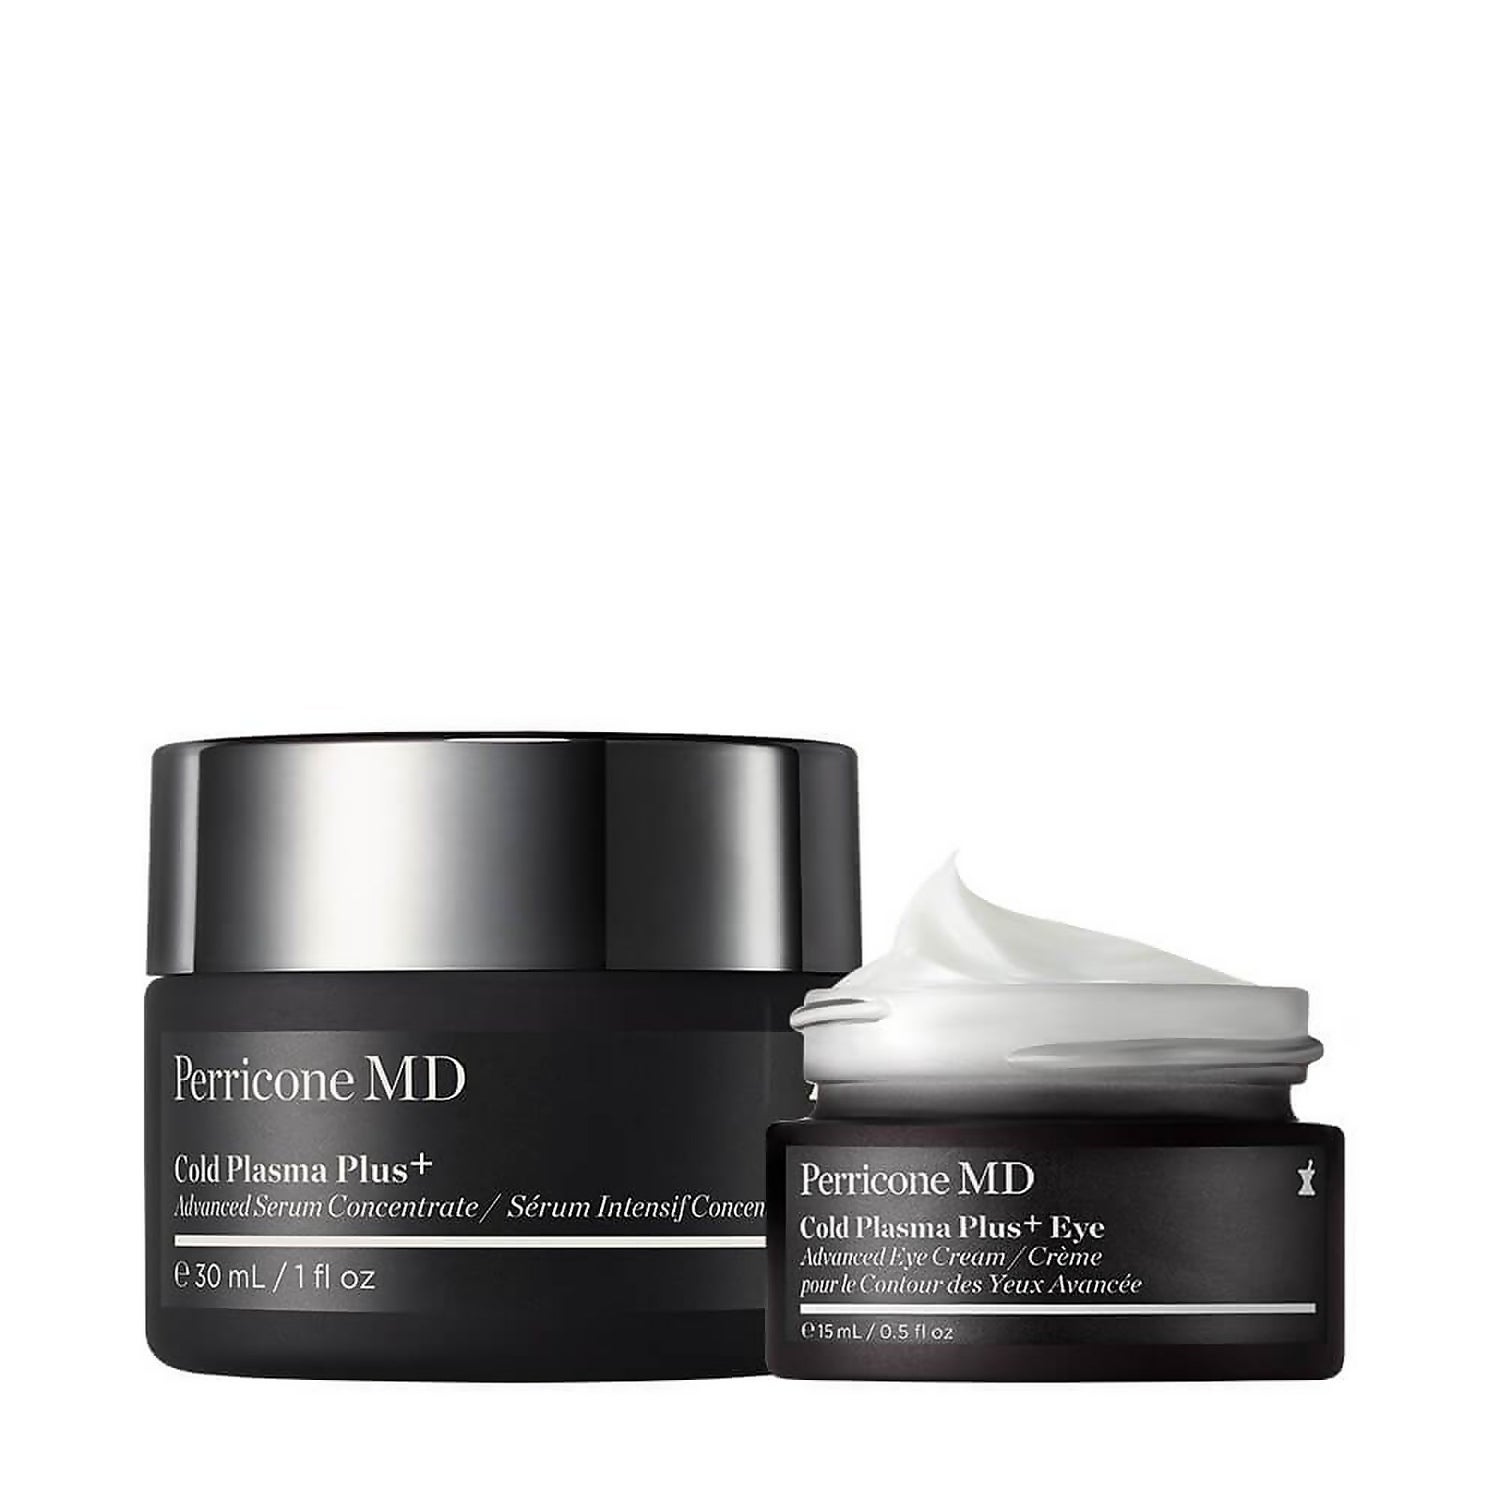 Perricone MD Face & Eye Power Duo